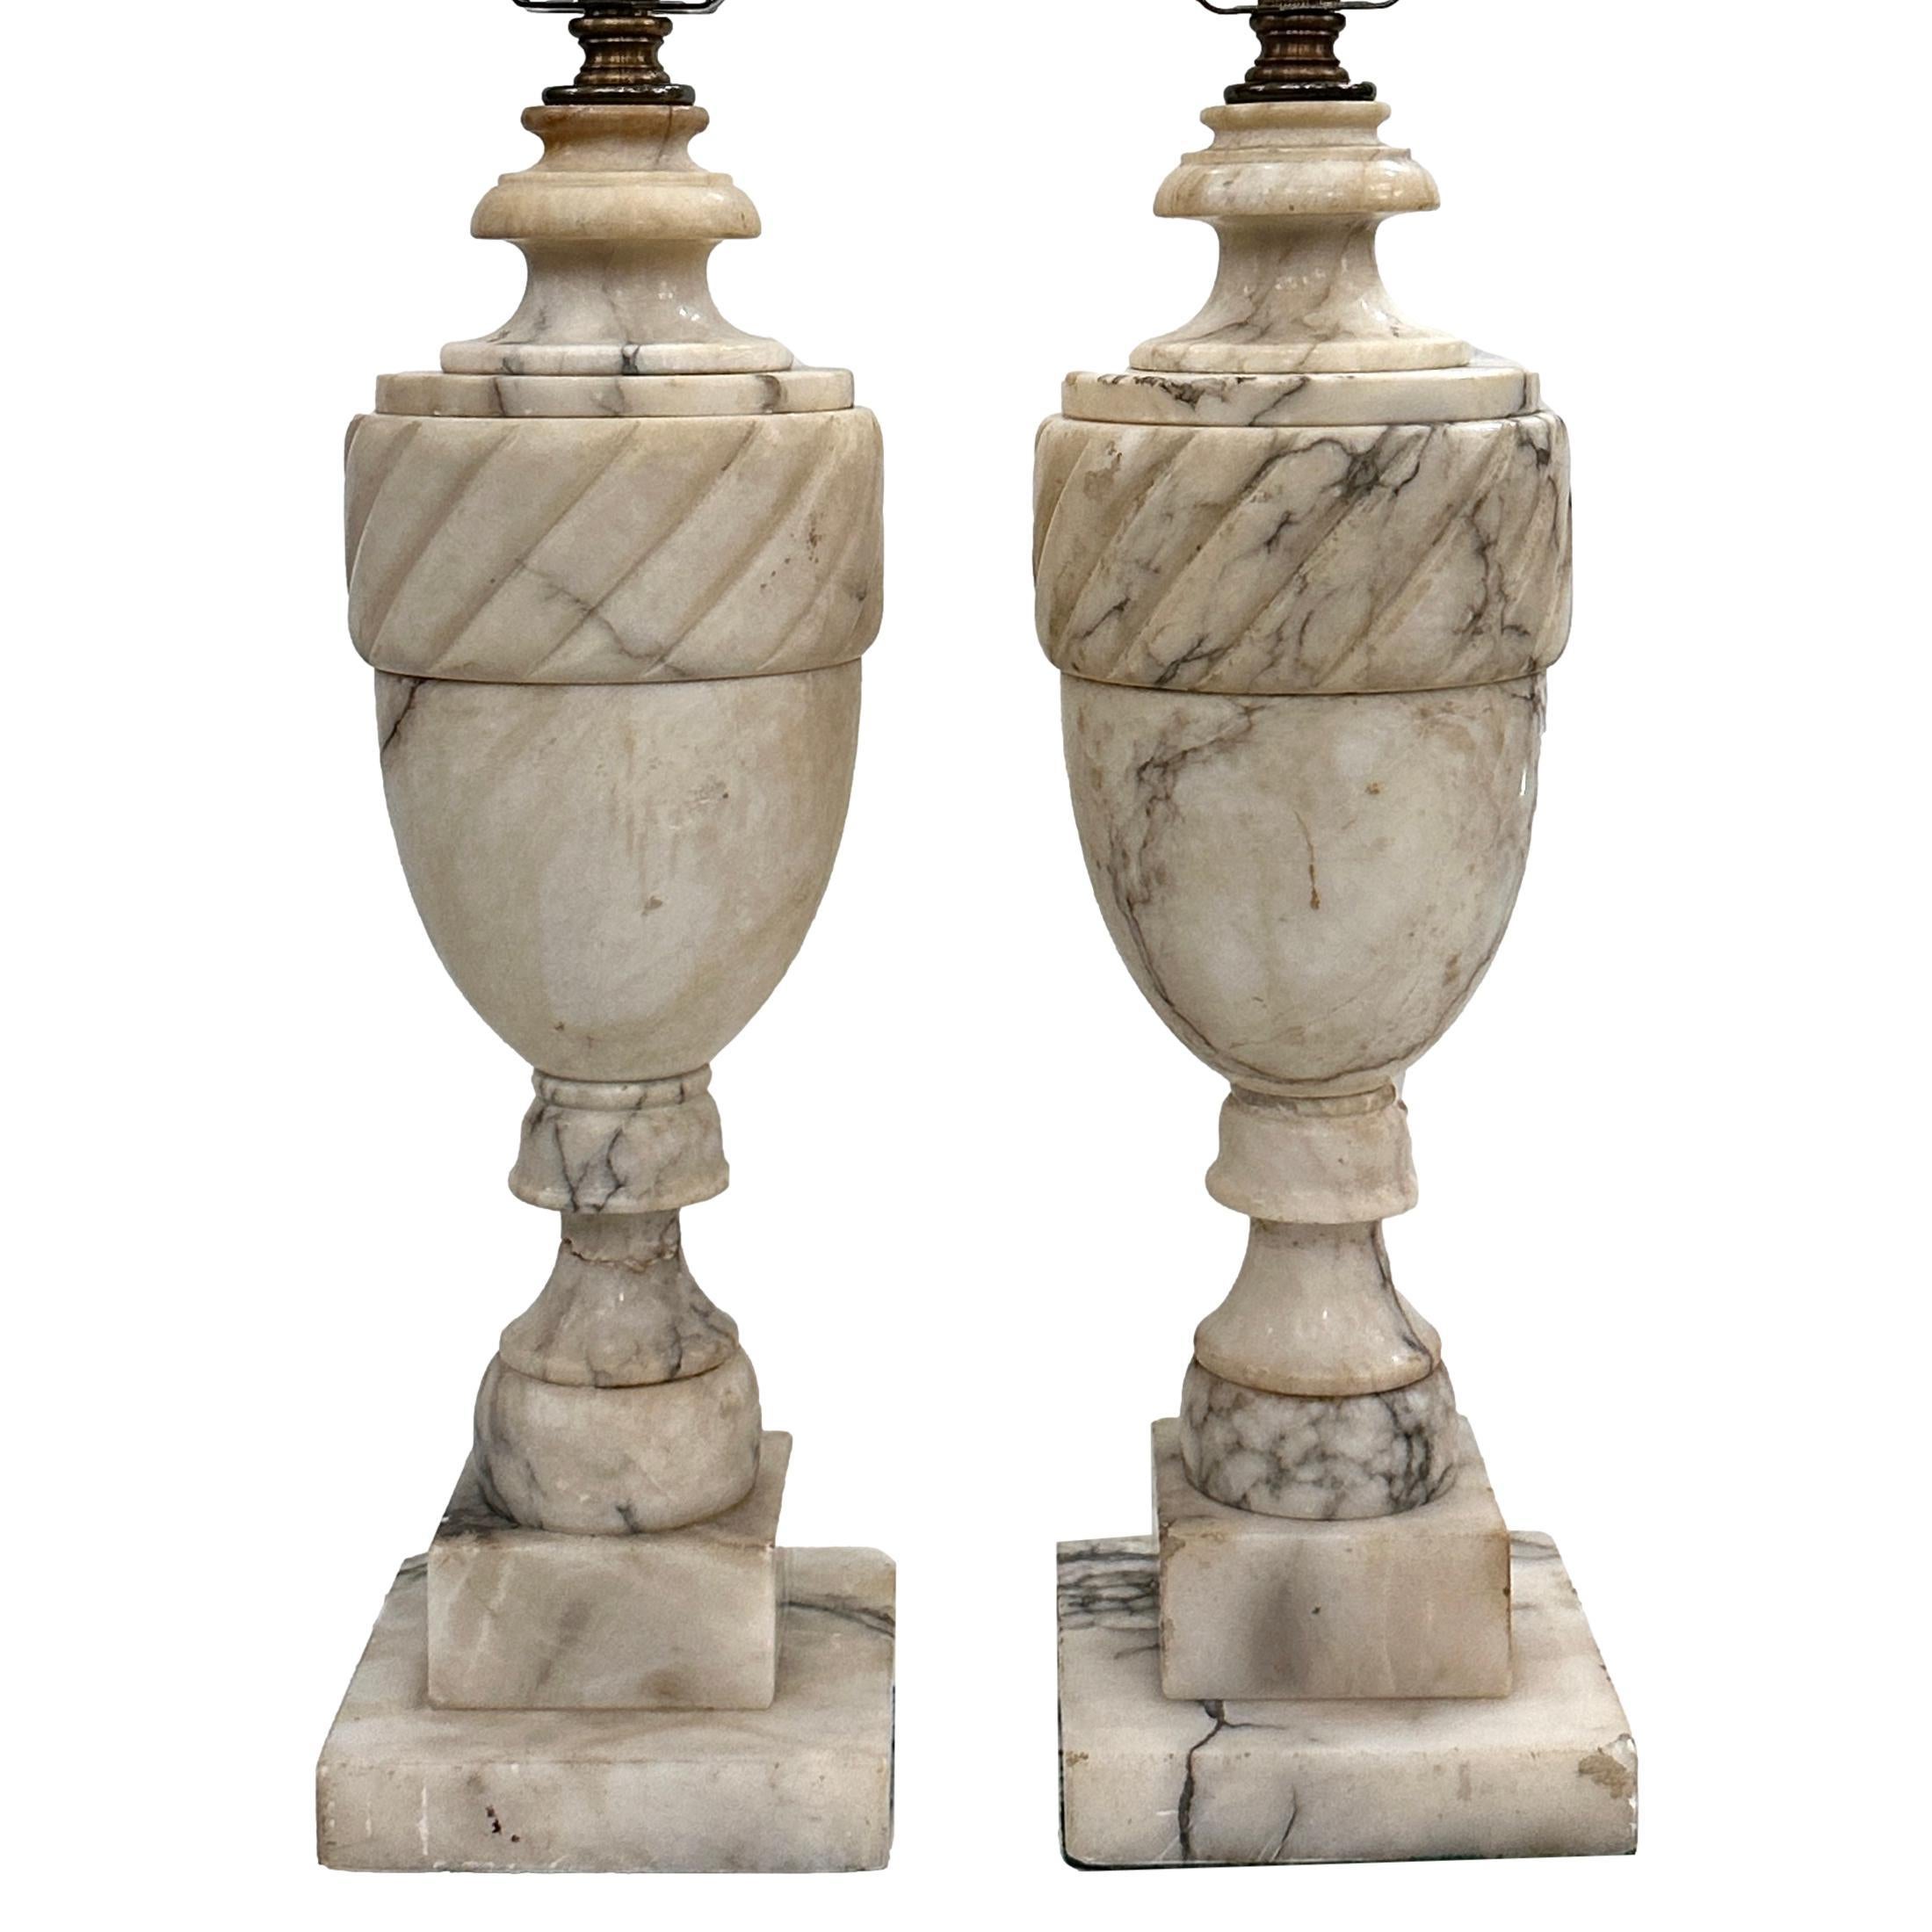 Pair of circa 1920's Italian carved alabaster table lamps with pedestal base.

Measurements:
Height of body: 15